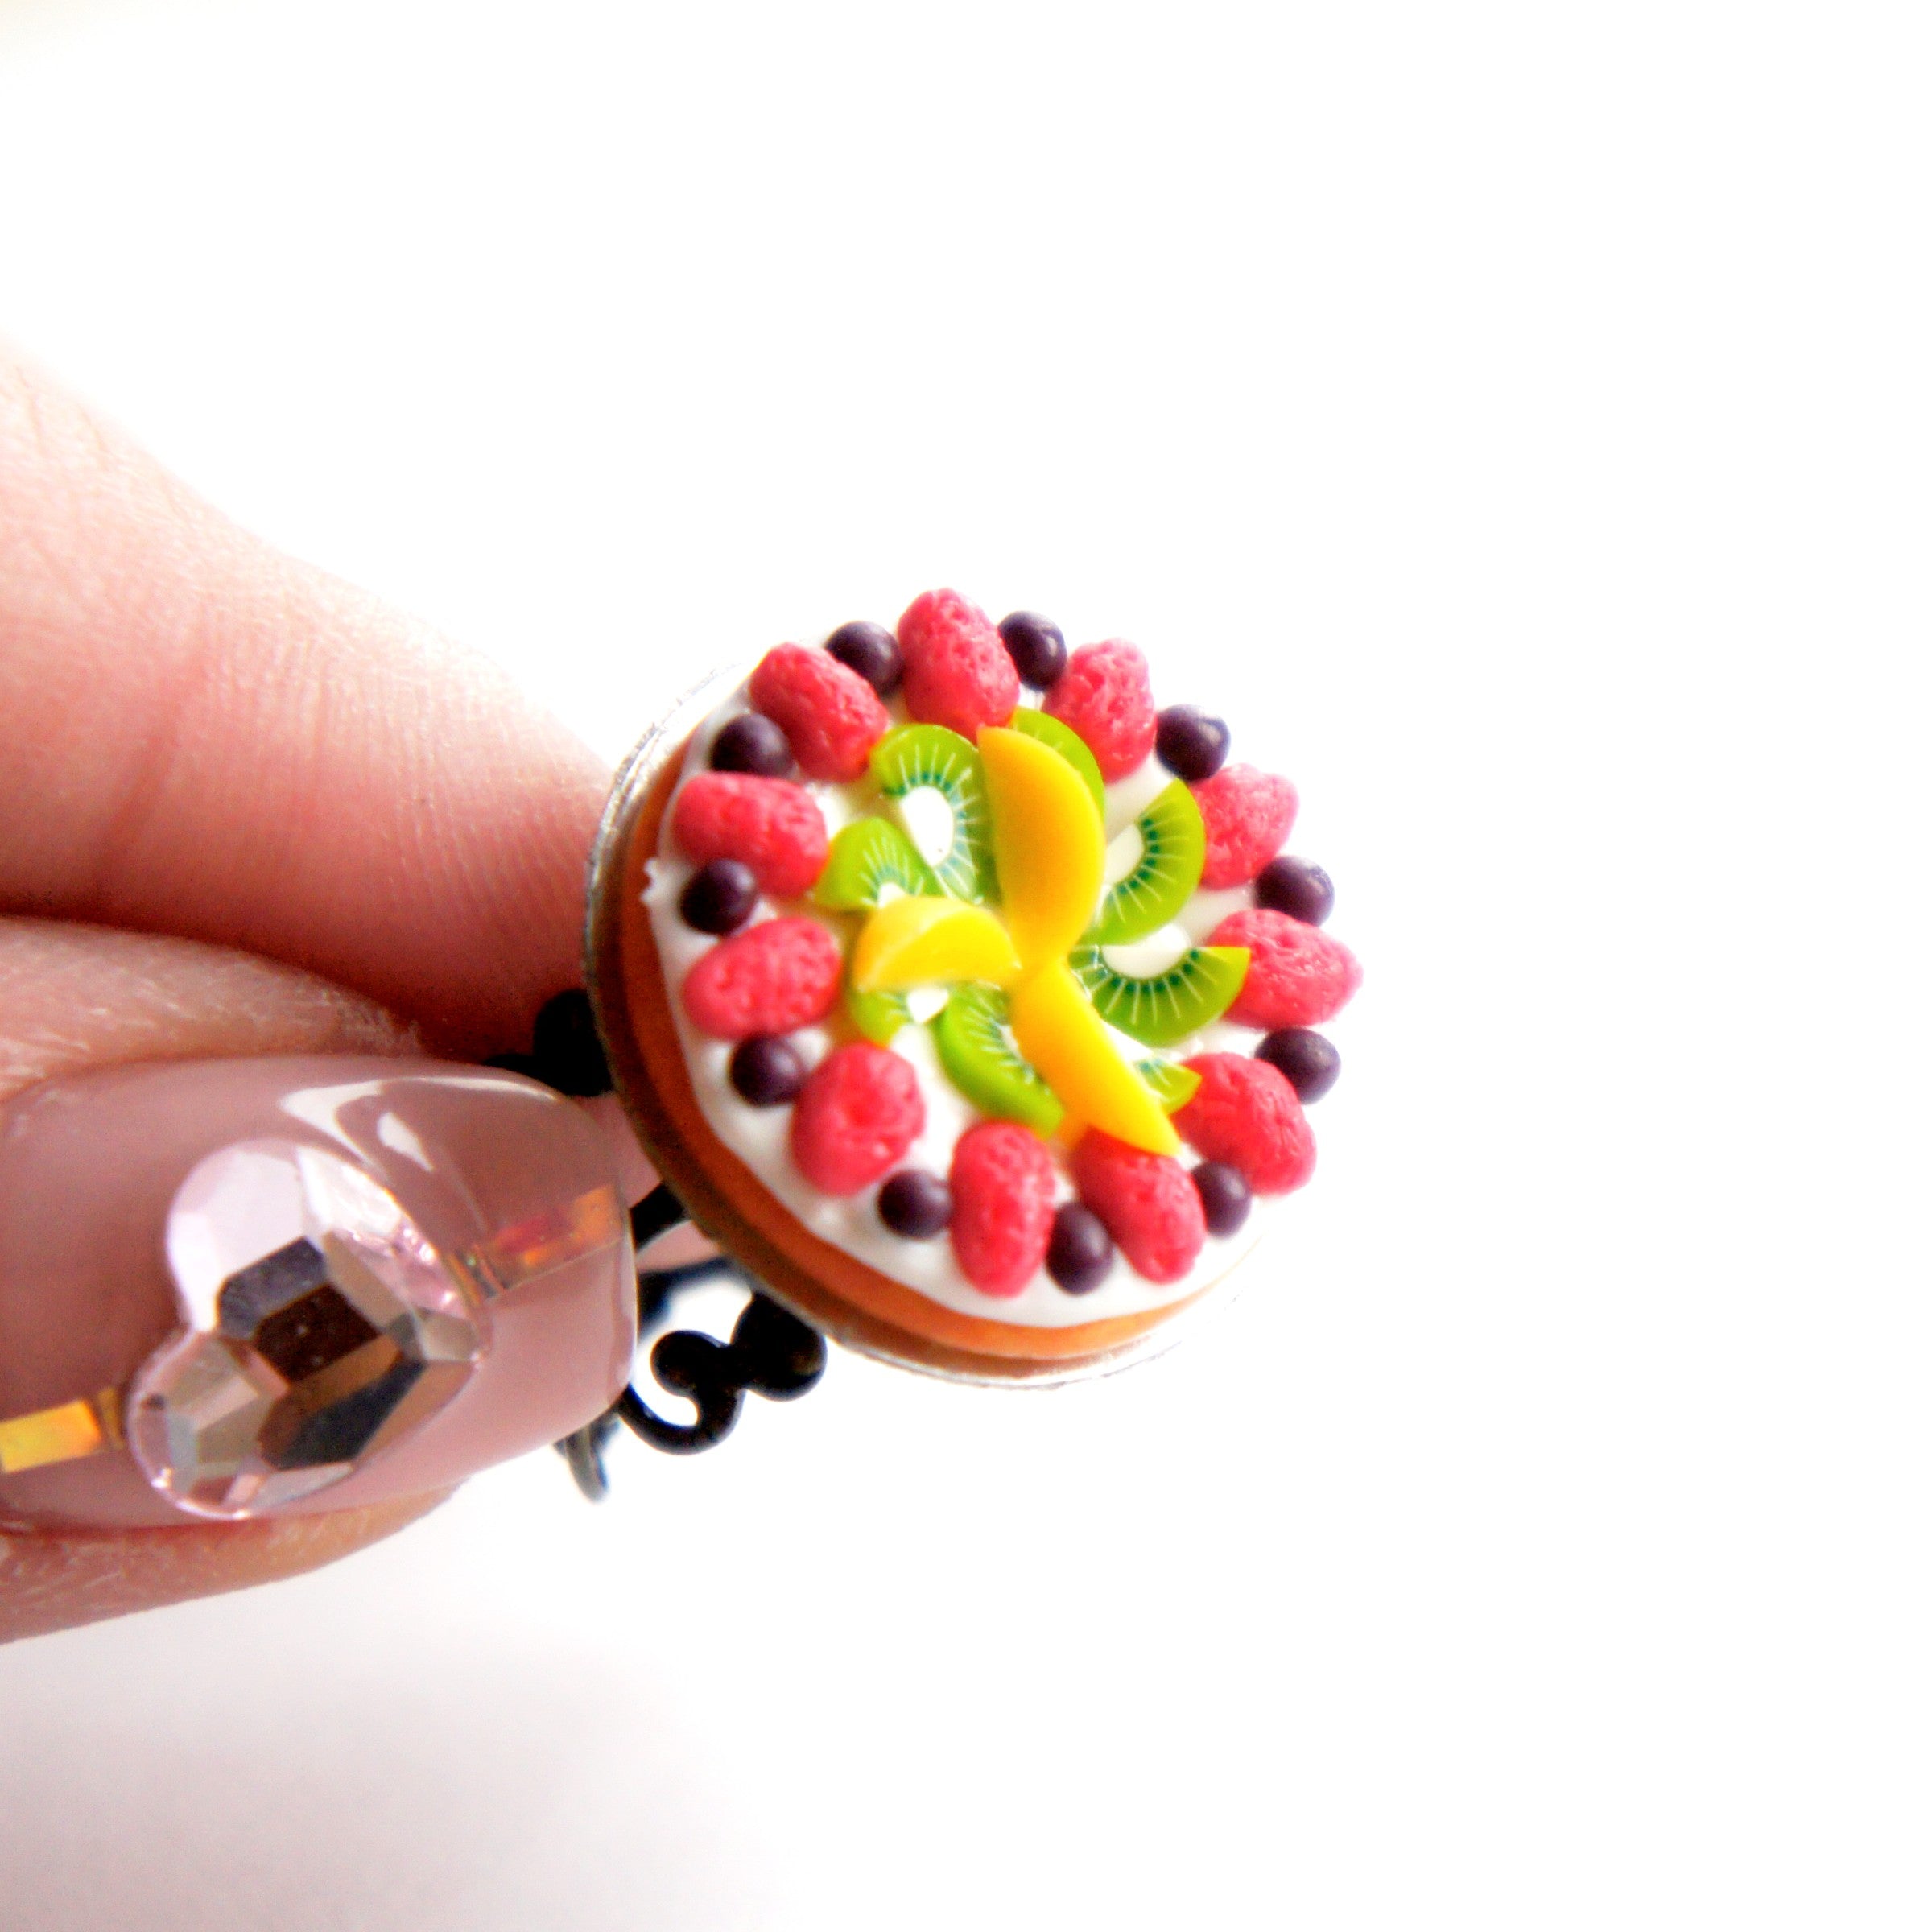 Mixed Fruit Pie Ring - Jillicious charms and accessories